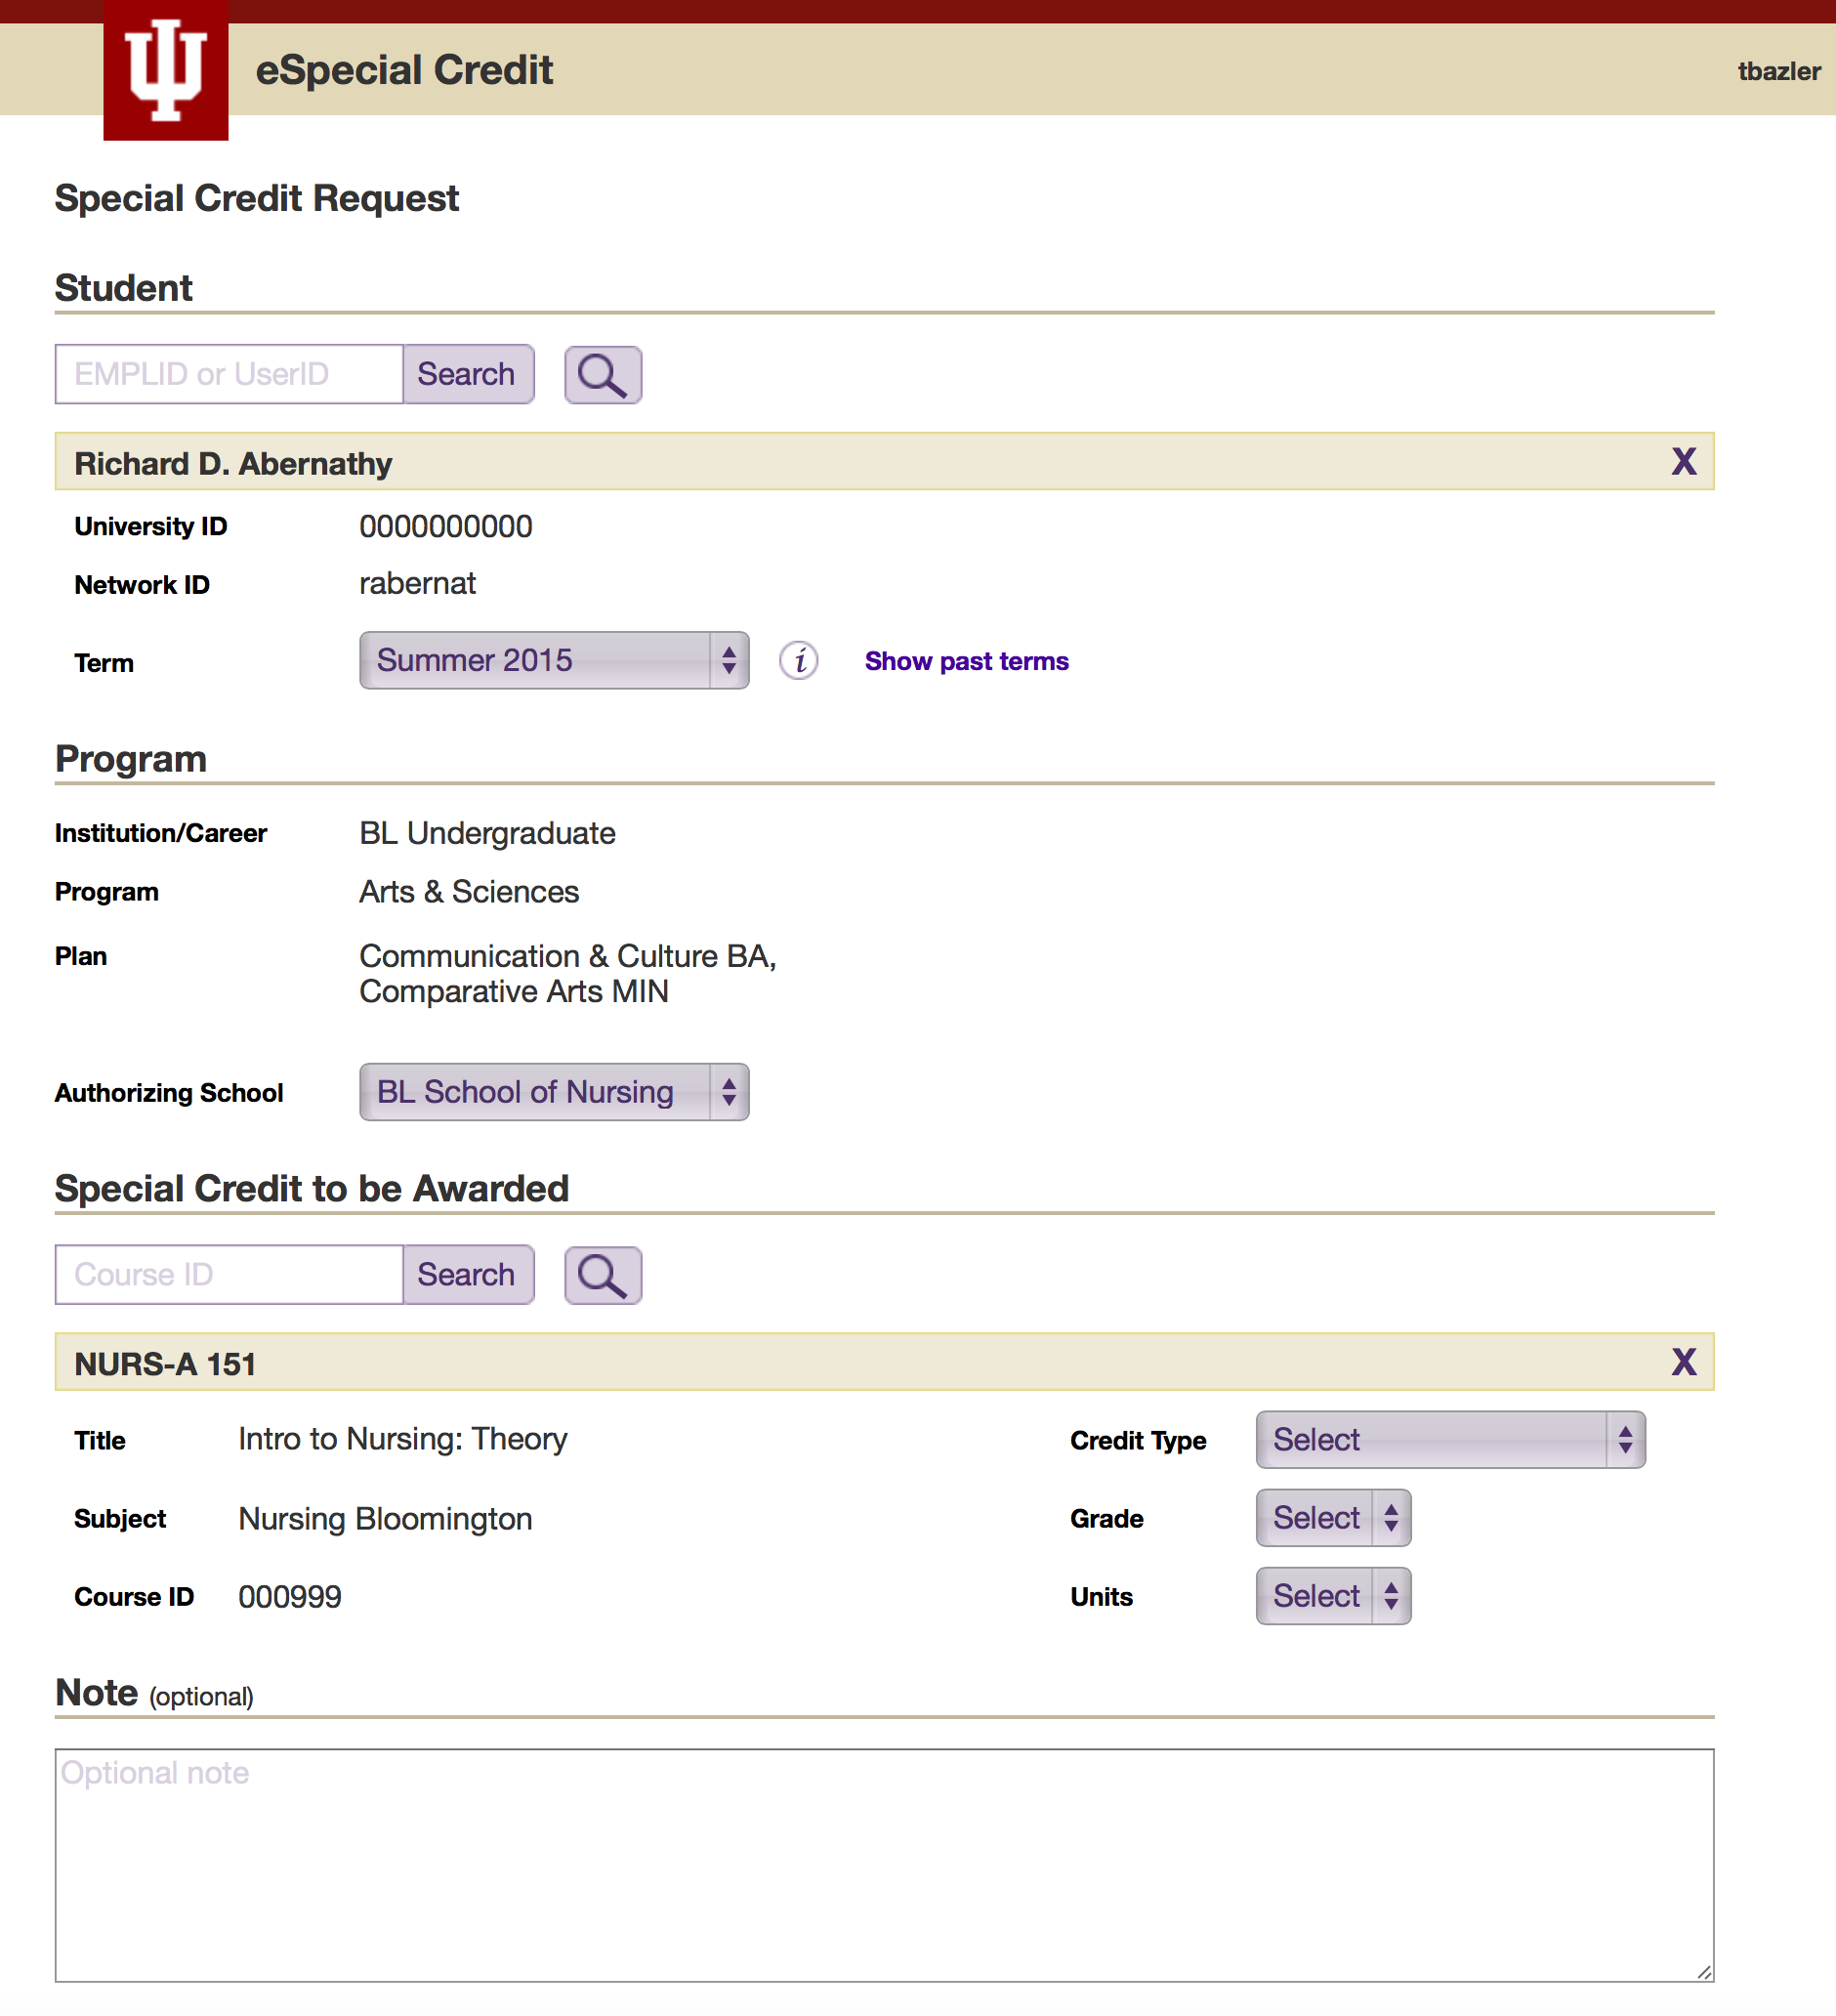 Wireframe illustrating the new design of the eSpecial Credit Request Form